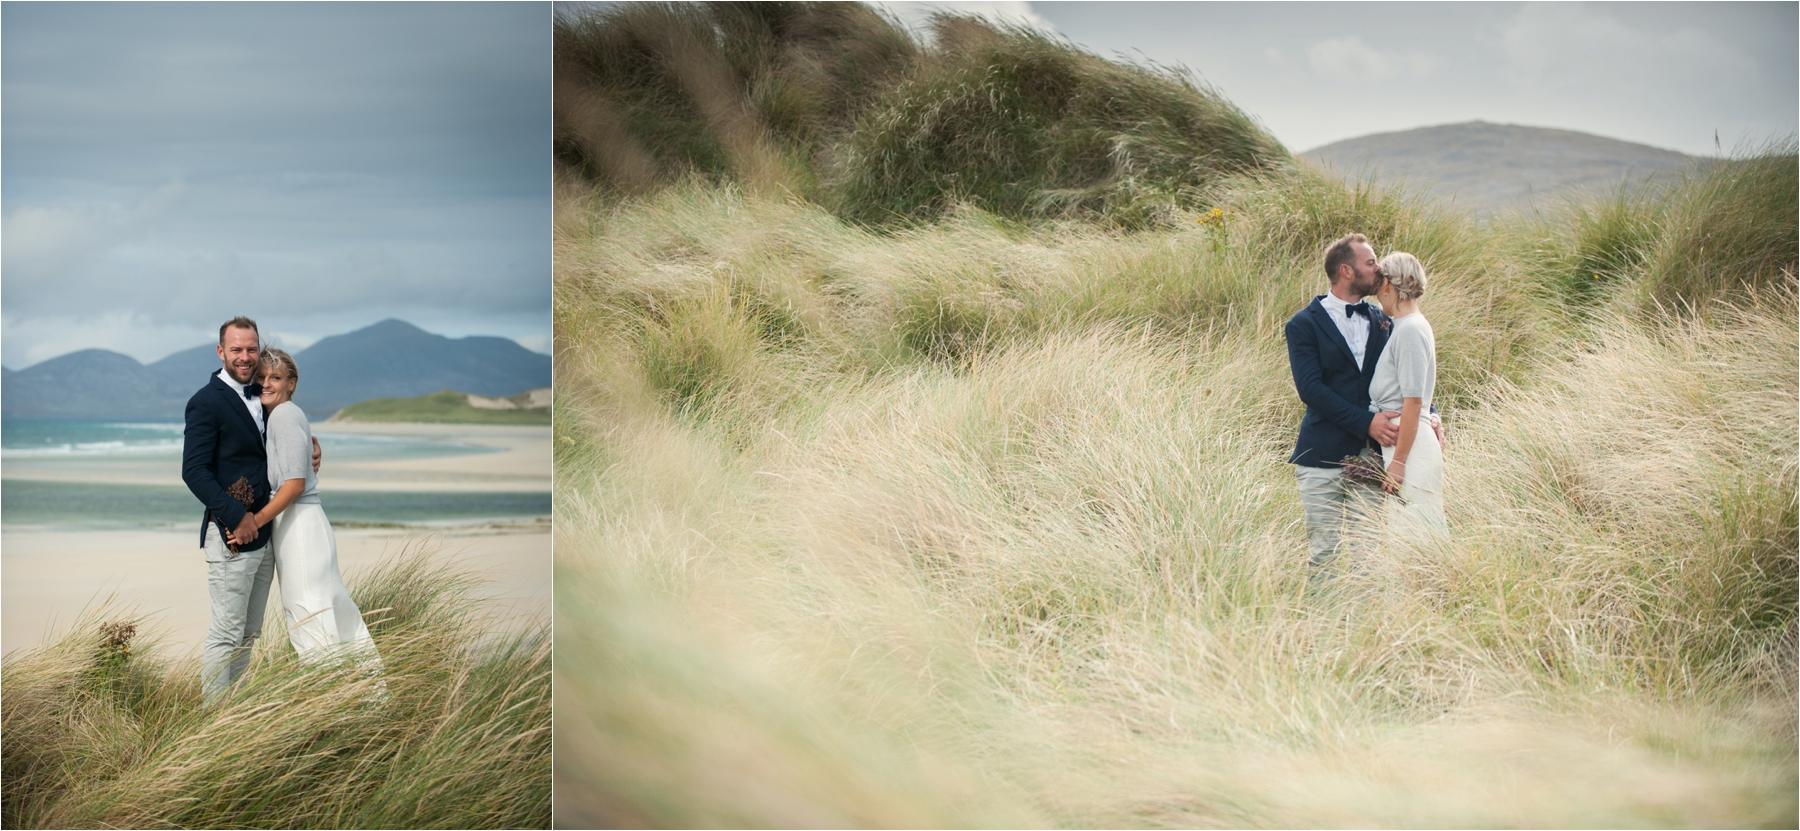 Portraits of a wedding for two on the Isle of Harris in the Scottish Highlands. The bride and groom are near Seilebost Beach. 